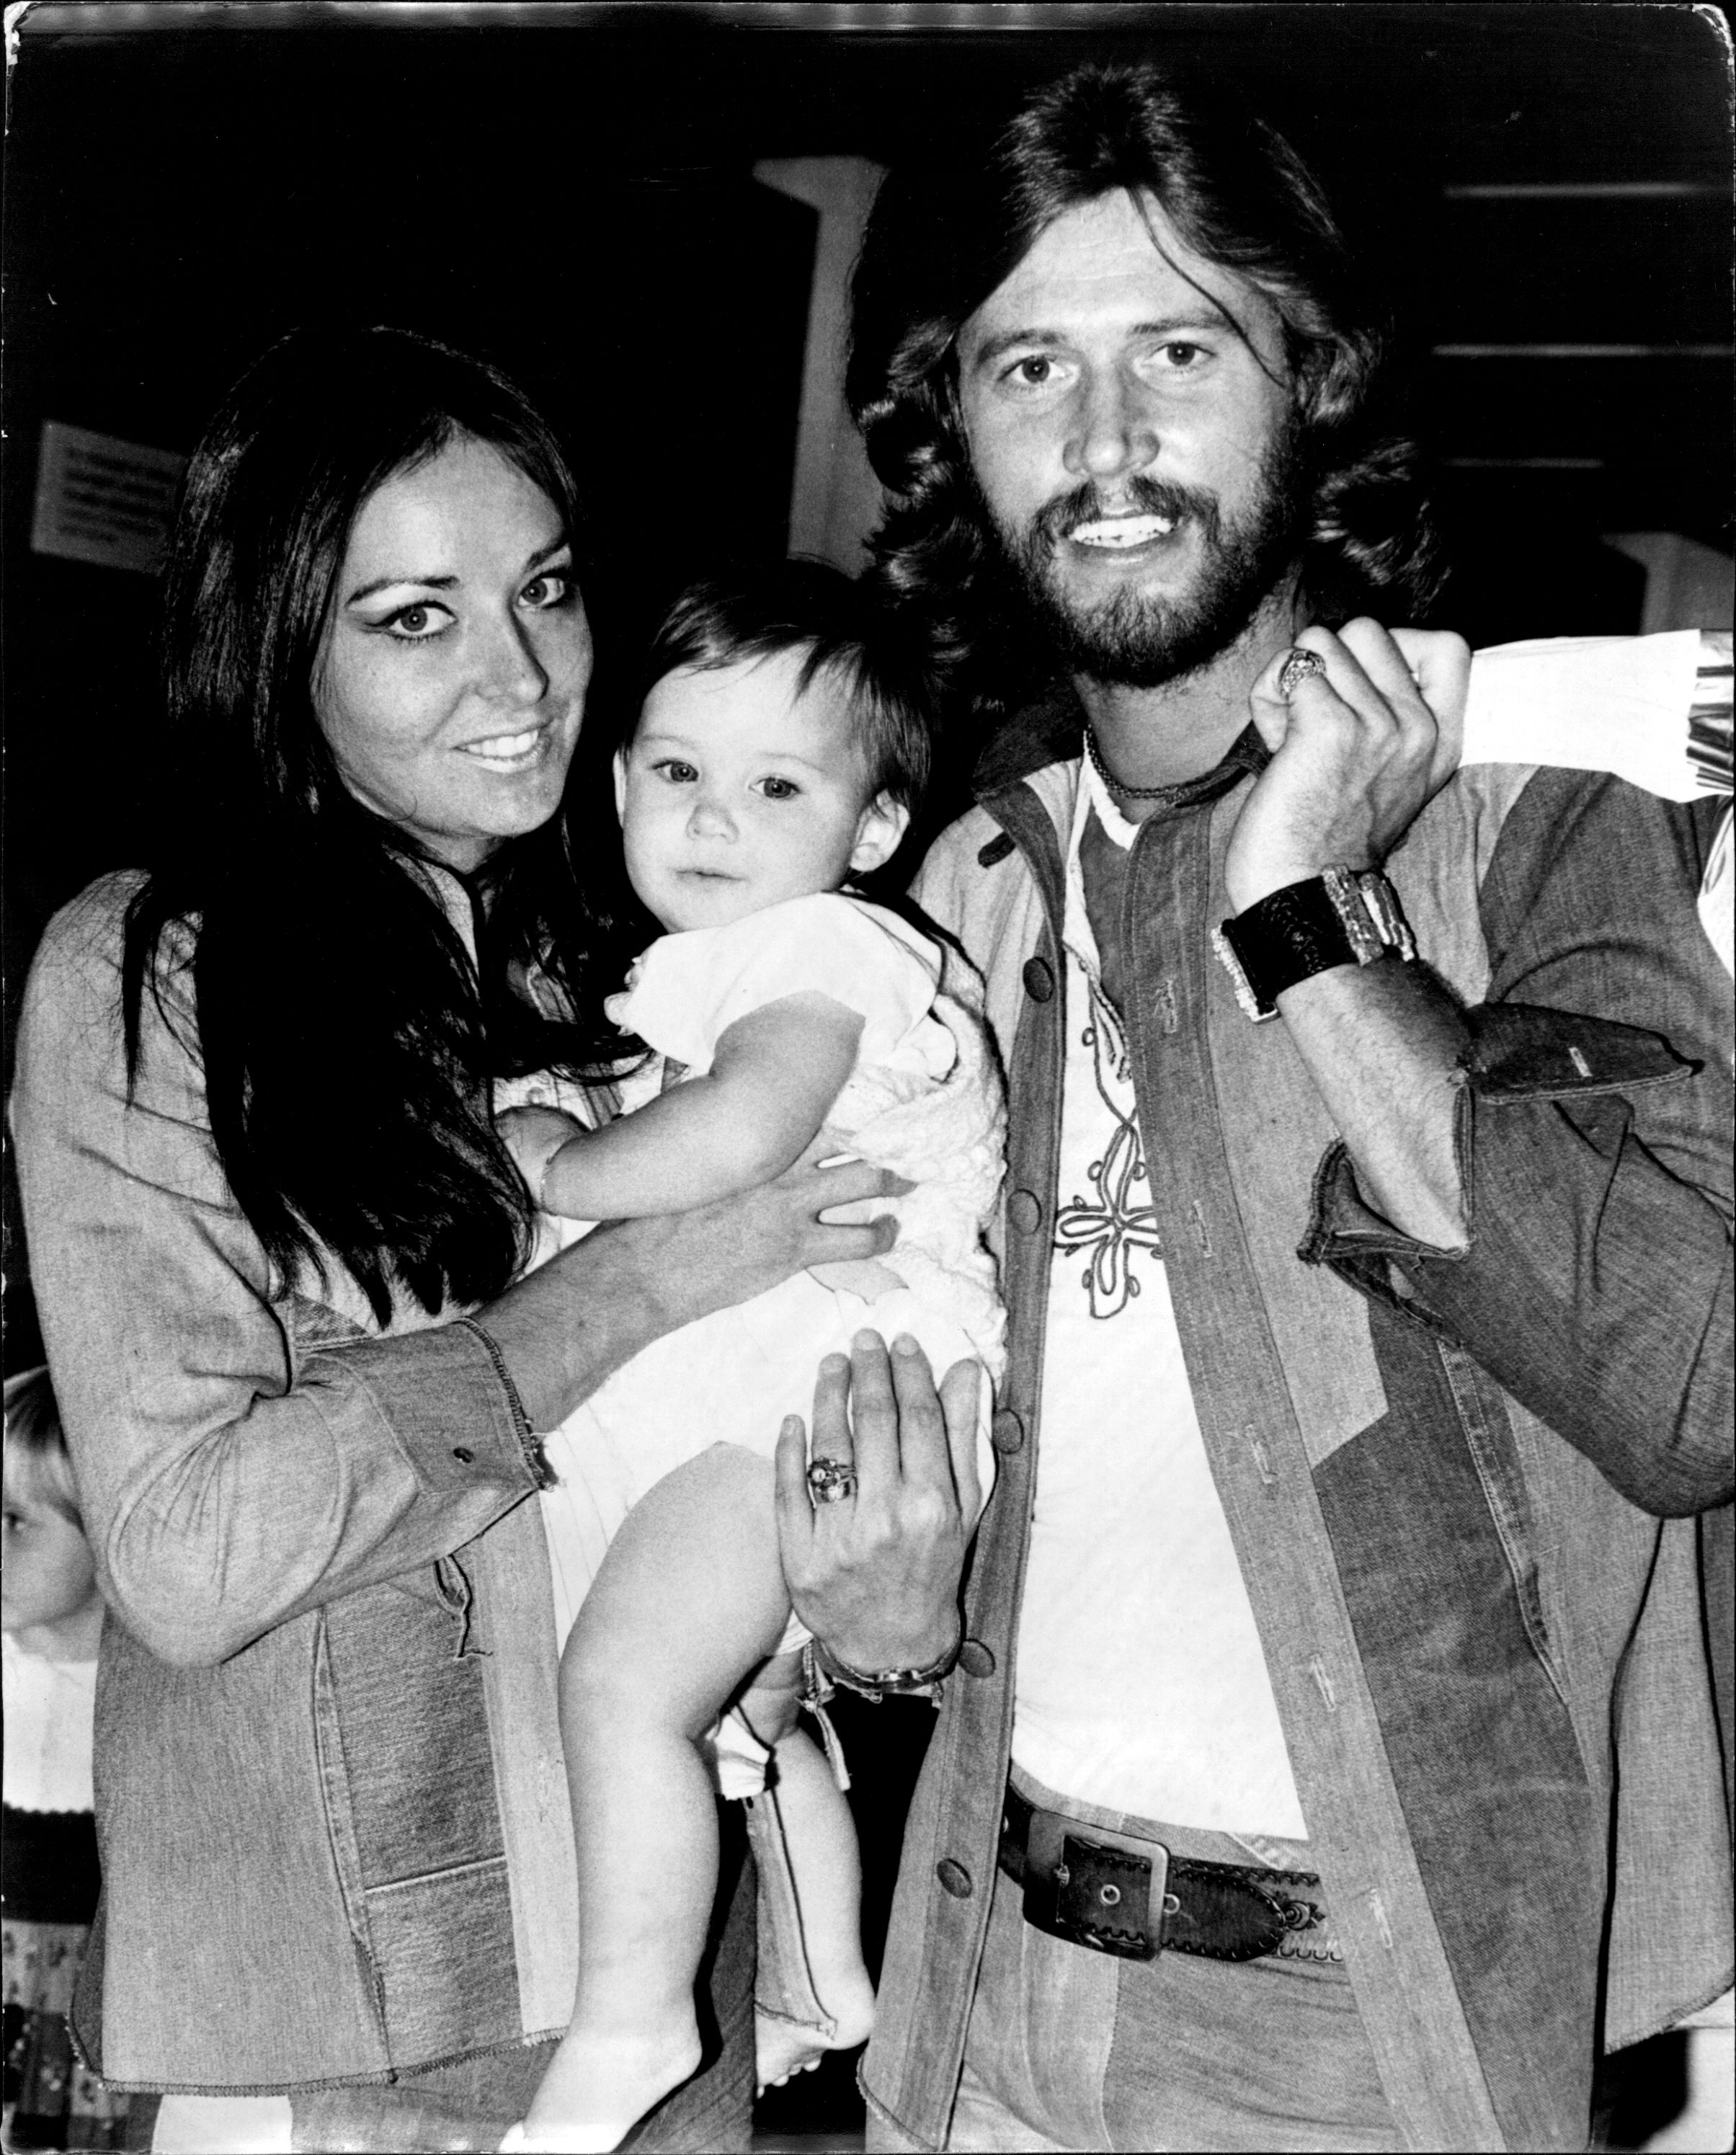 Linda Gray, Stephen, and Barry Gibb during the Bee Gees' 3-week tour in Australia, 1974 | Source: Getty Images